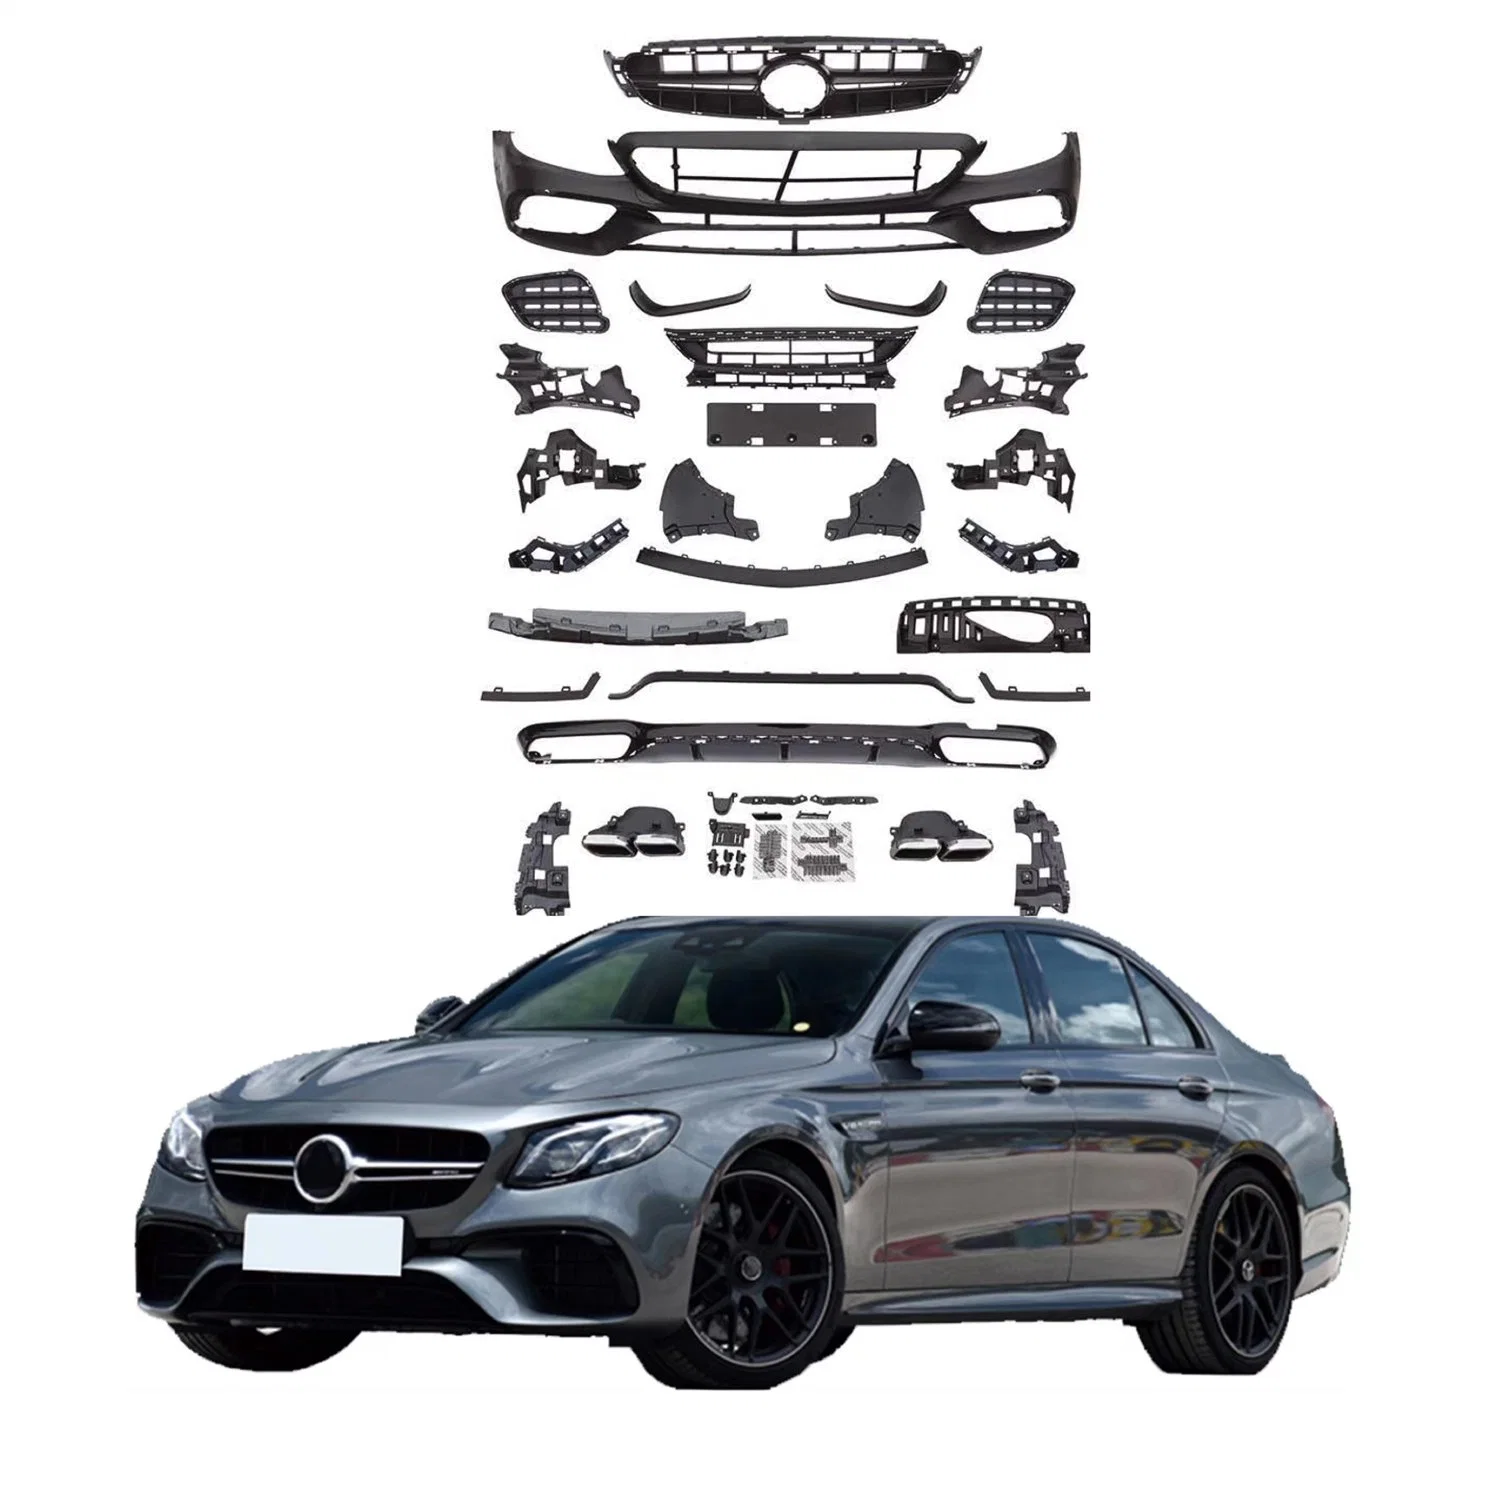 2016 2020 Vehicle Modification Parts for Mercedes Benz E Class W213 Facelift E63 Amg Body Kit